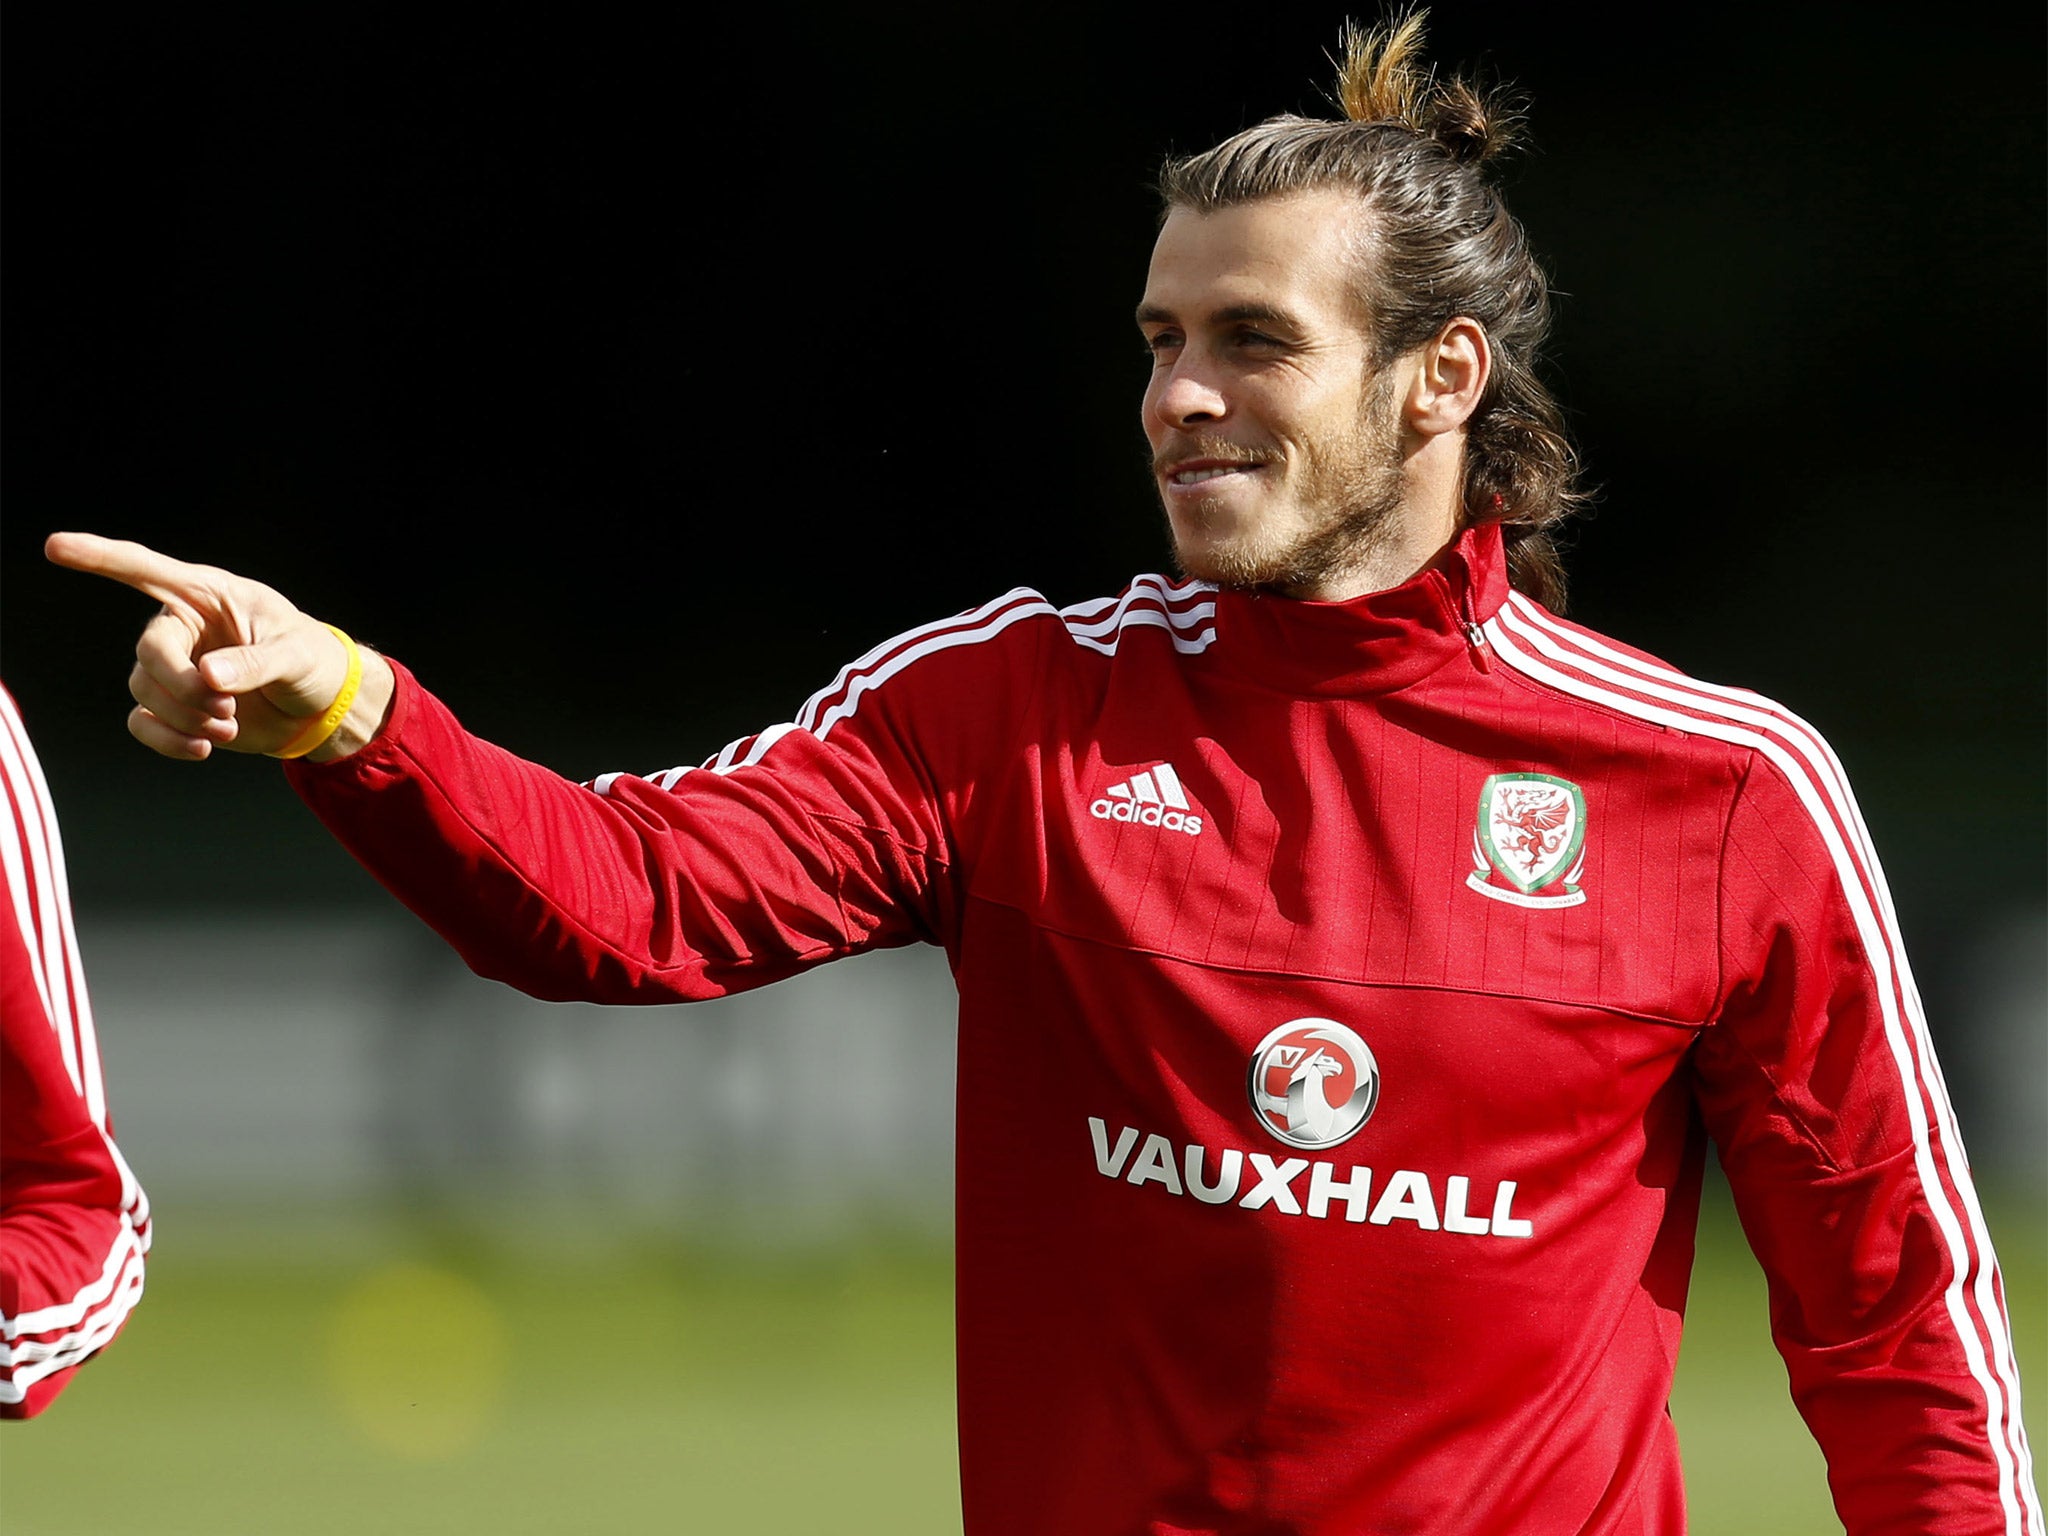 Gareth Bale training with the Wales squad in Glamorgan on Tuesday